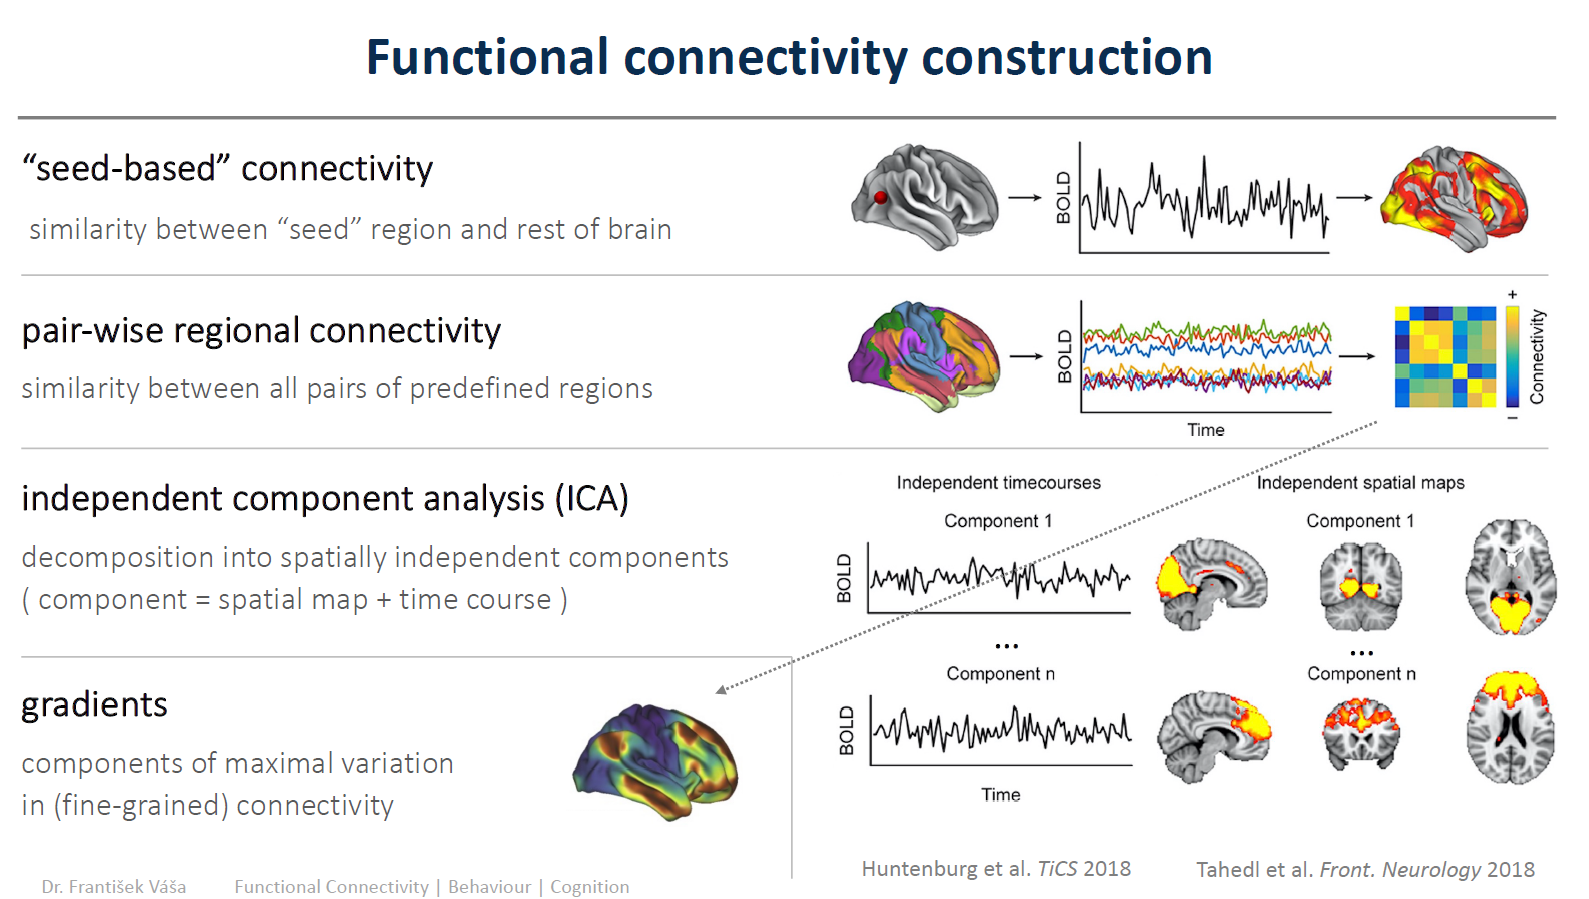 Functional connectivity construction